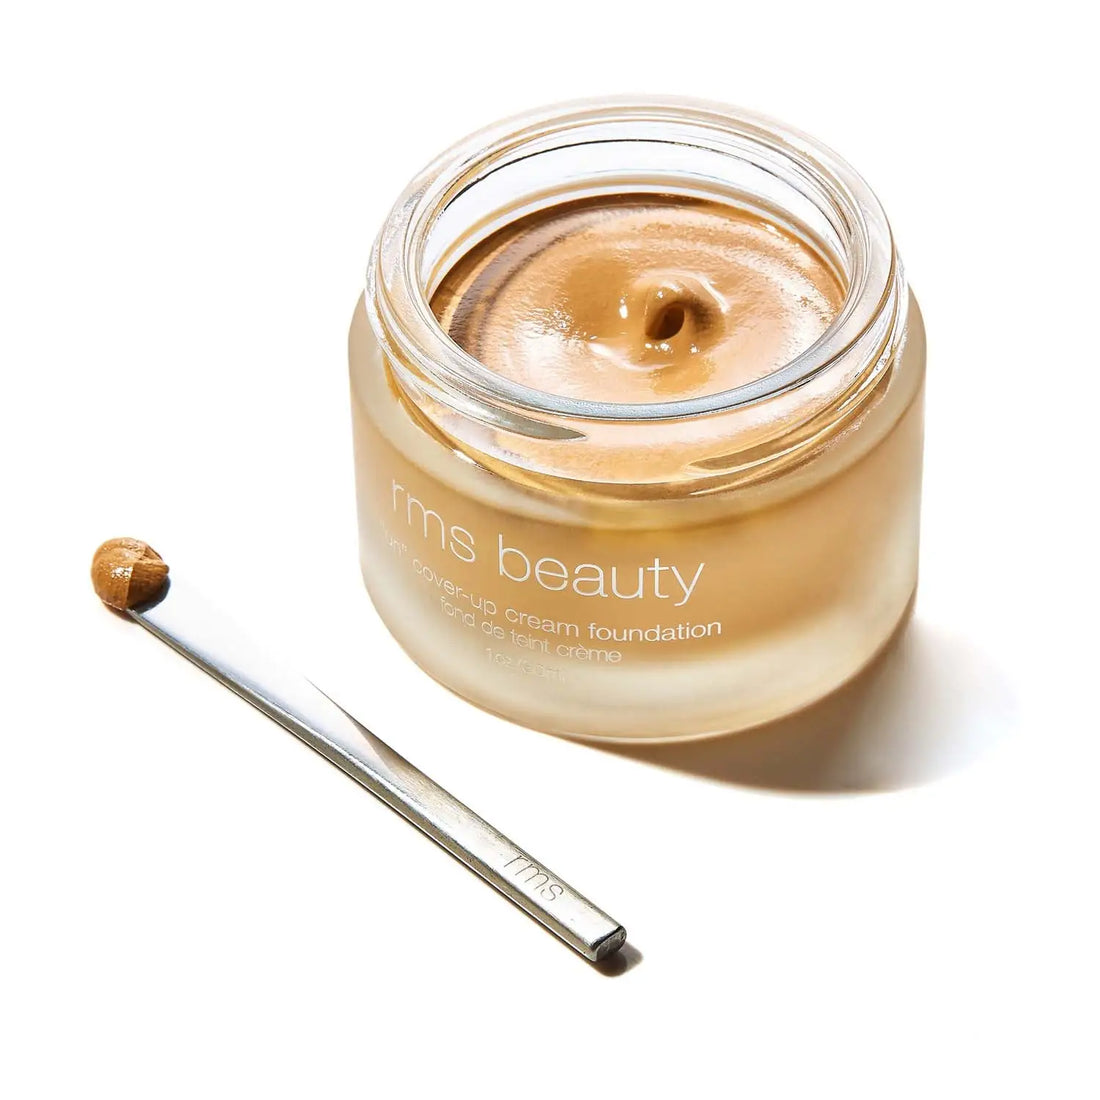 RMS Beauty Un' Cover-up Cream Foundation, 30ml - 000